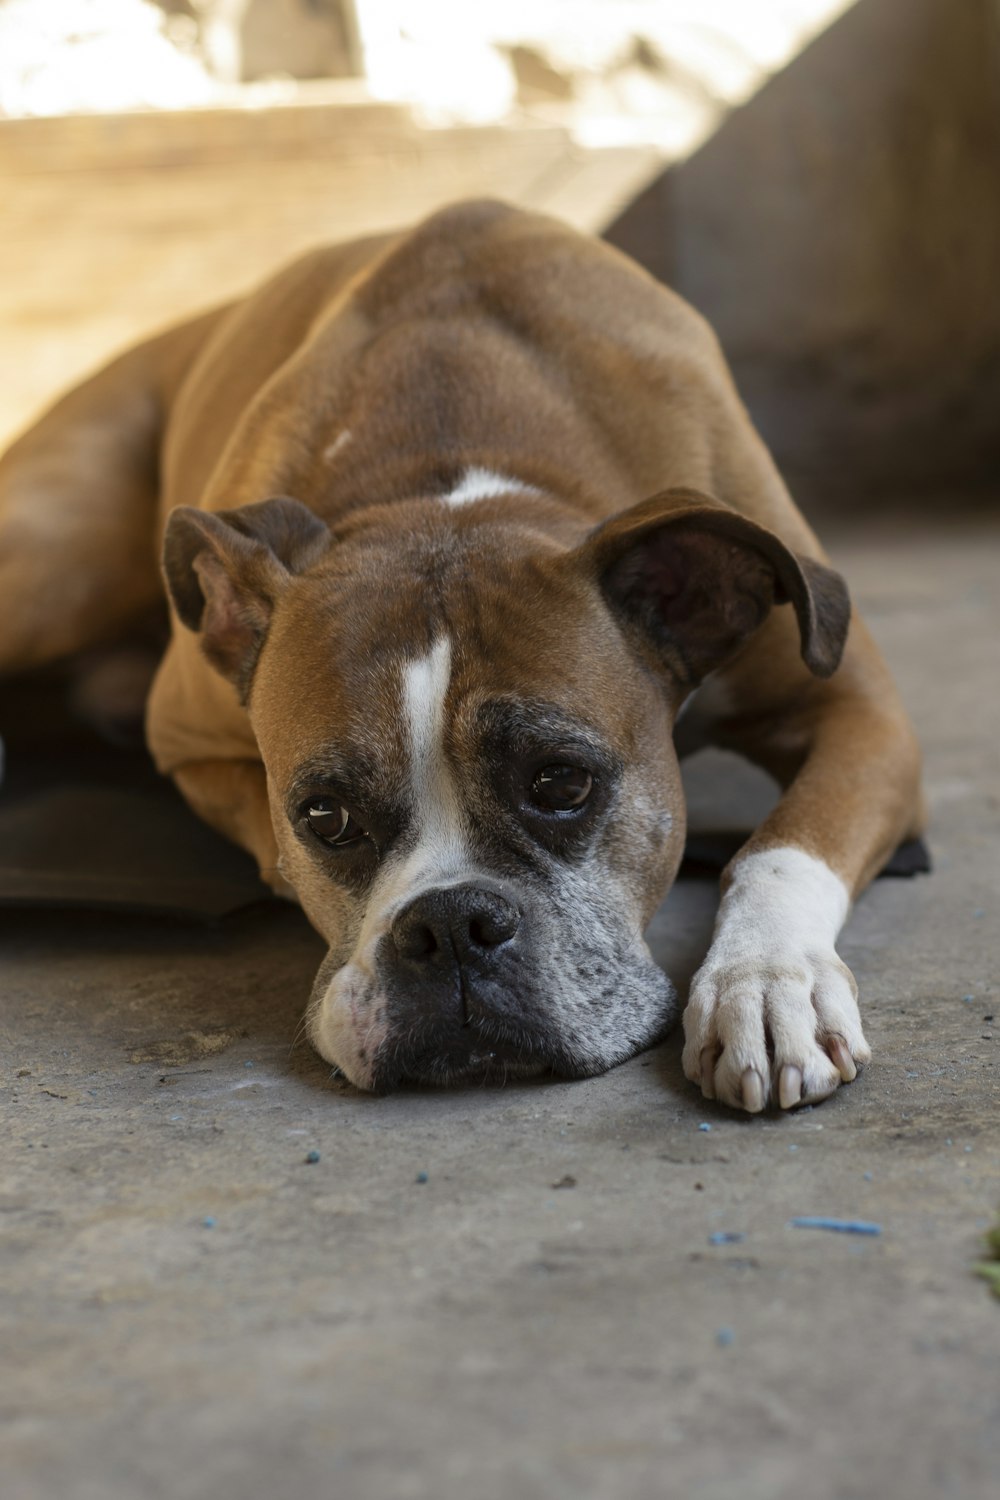 brown and white short coated dog lying on gray concrete floor